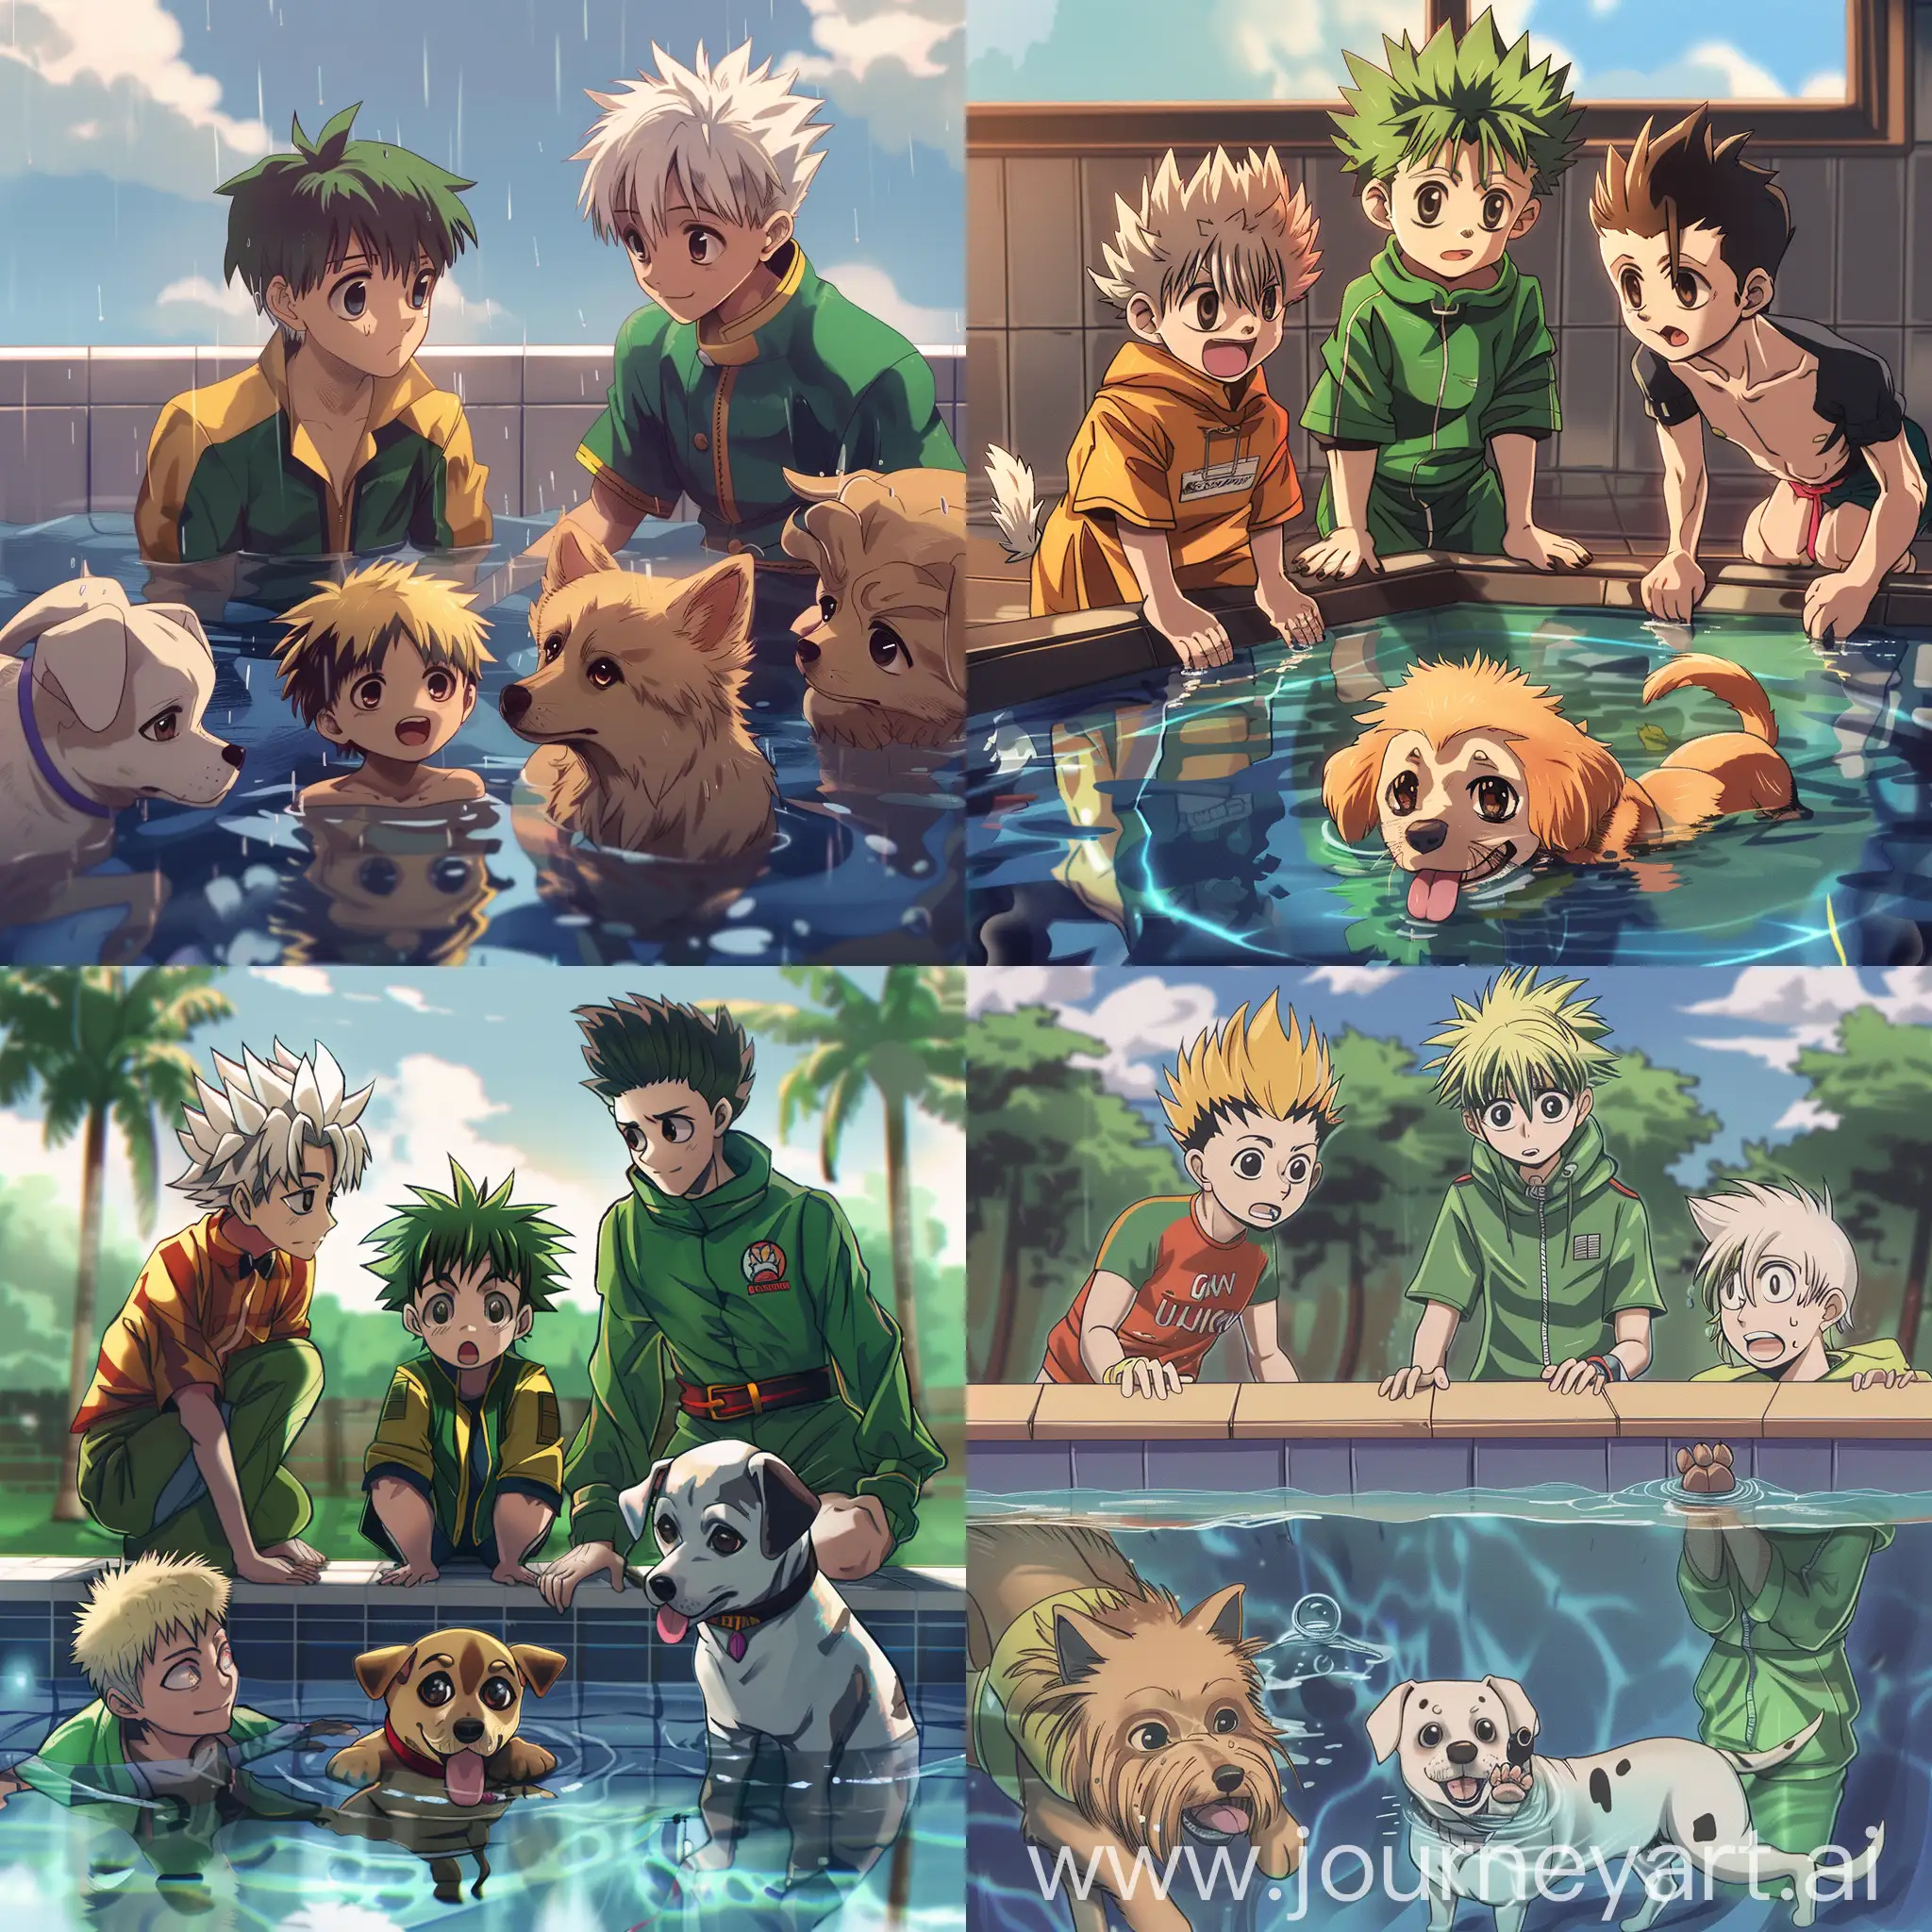 Hunter-x-Hunter-Characters-in-Mother-Ignoring-Kid-Drowning-in-a-Pool-Meme-Style